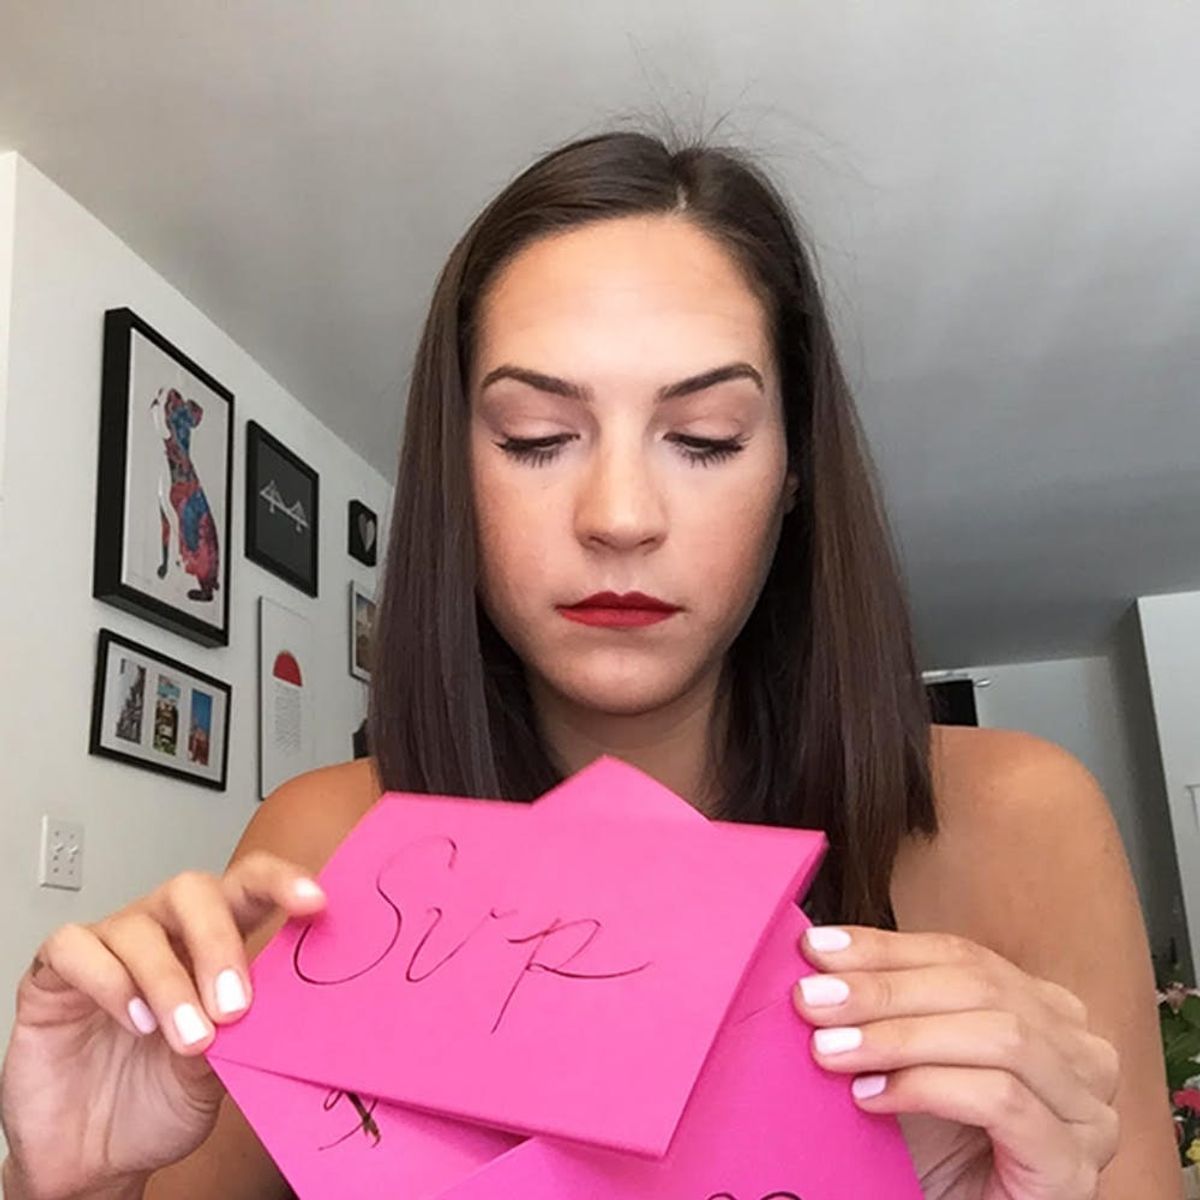 What Happened When a Self-Proclaimed Jock Challenged Herself to Learn Calligraphy